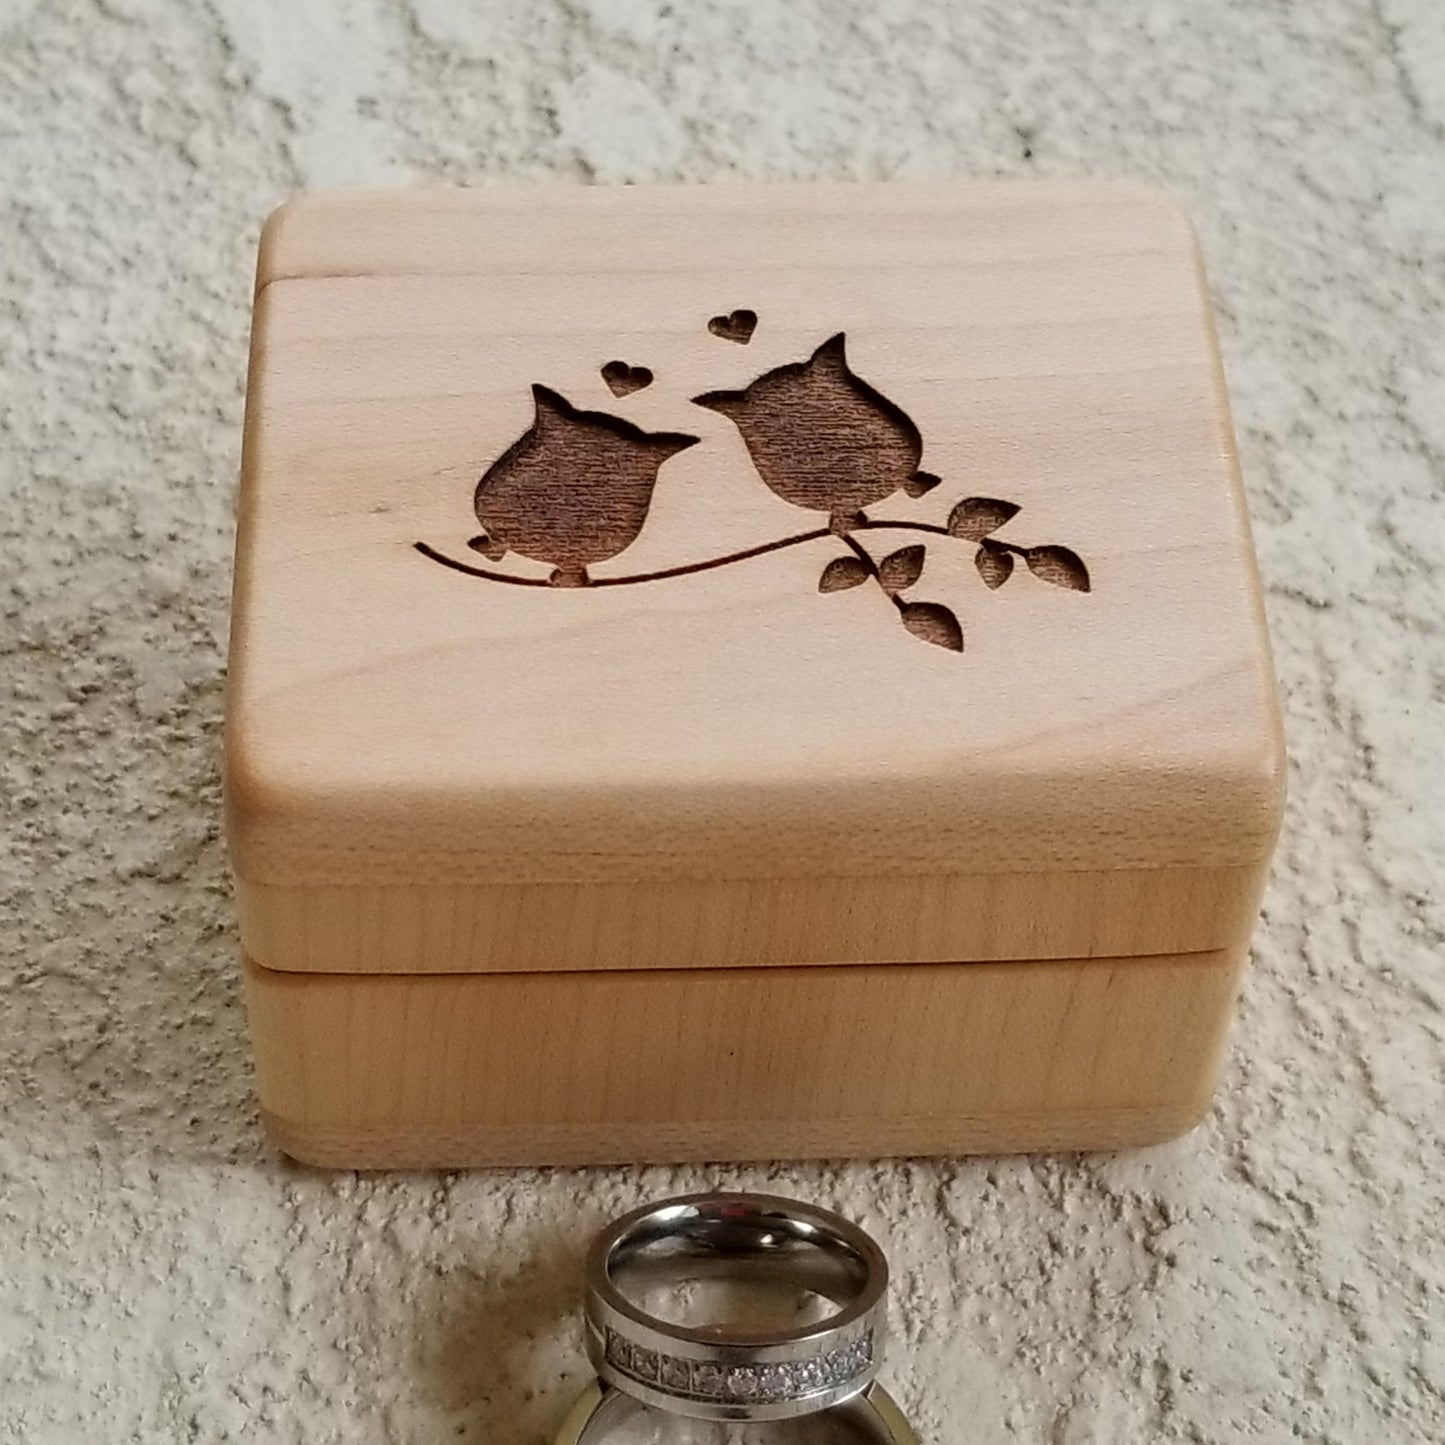 owls ring box, proposal box with 2 cute owls engraved on top